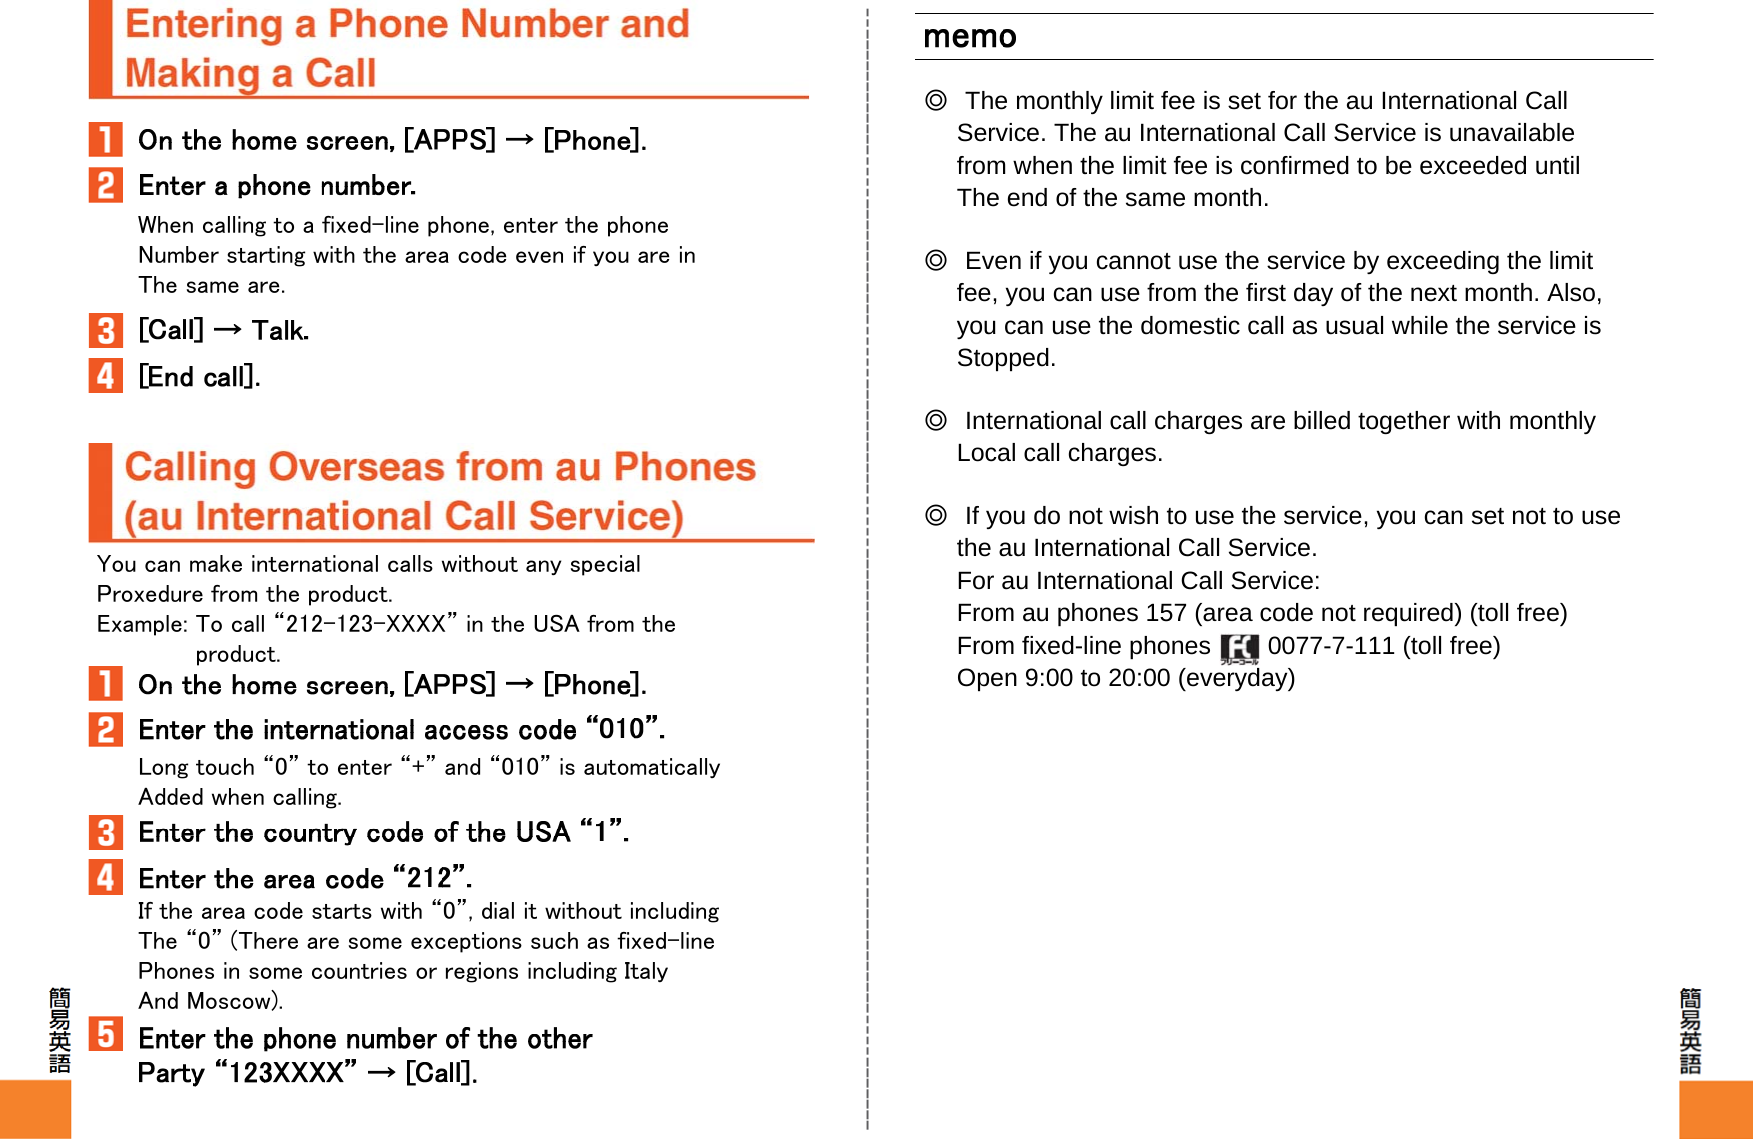 When calling to a fixed-line phone, enter the phoneNumber starting with the area code even if you are inThe same are.You can make international calls without any specialProxedure from the product.Example: To call “212-123-XXXX” in the USA from theproduct.Long touch “0” to enter “+” and “010” is automaticallyAdded when calling.If the area code starts with “0”, dial it without includingThe “0” (There are some exceptions such as fixed-linePhones in some countries or regions including ItalyAnd Moscow).◎The monthly limit fee is set for the au International CallService. The au International Call Service is unavailablefrom when the limit fee is confirmed to be exceeded untilThe end of the same month.◎Even if you cannot use the service by exceeding the limitfee, you can use from the first day of the next month. Also,you can use the domestic call as usual while the service isStopped.◎International call charges are billed together with monthlyLocal call charges.◎If you do not wish to use the service, you can set not to usethe au International Call Service.For au International Call Service:From au phones 157 (area code not required) (toll free)From fixed-line phones  0077-7-111 (toll free)Open 9:00 to 20:00 (everyday)